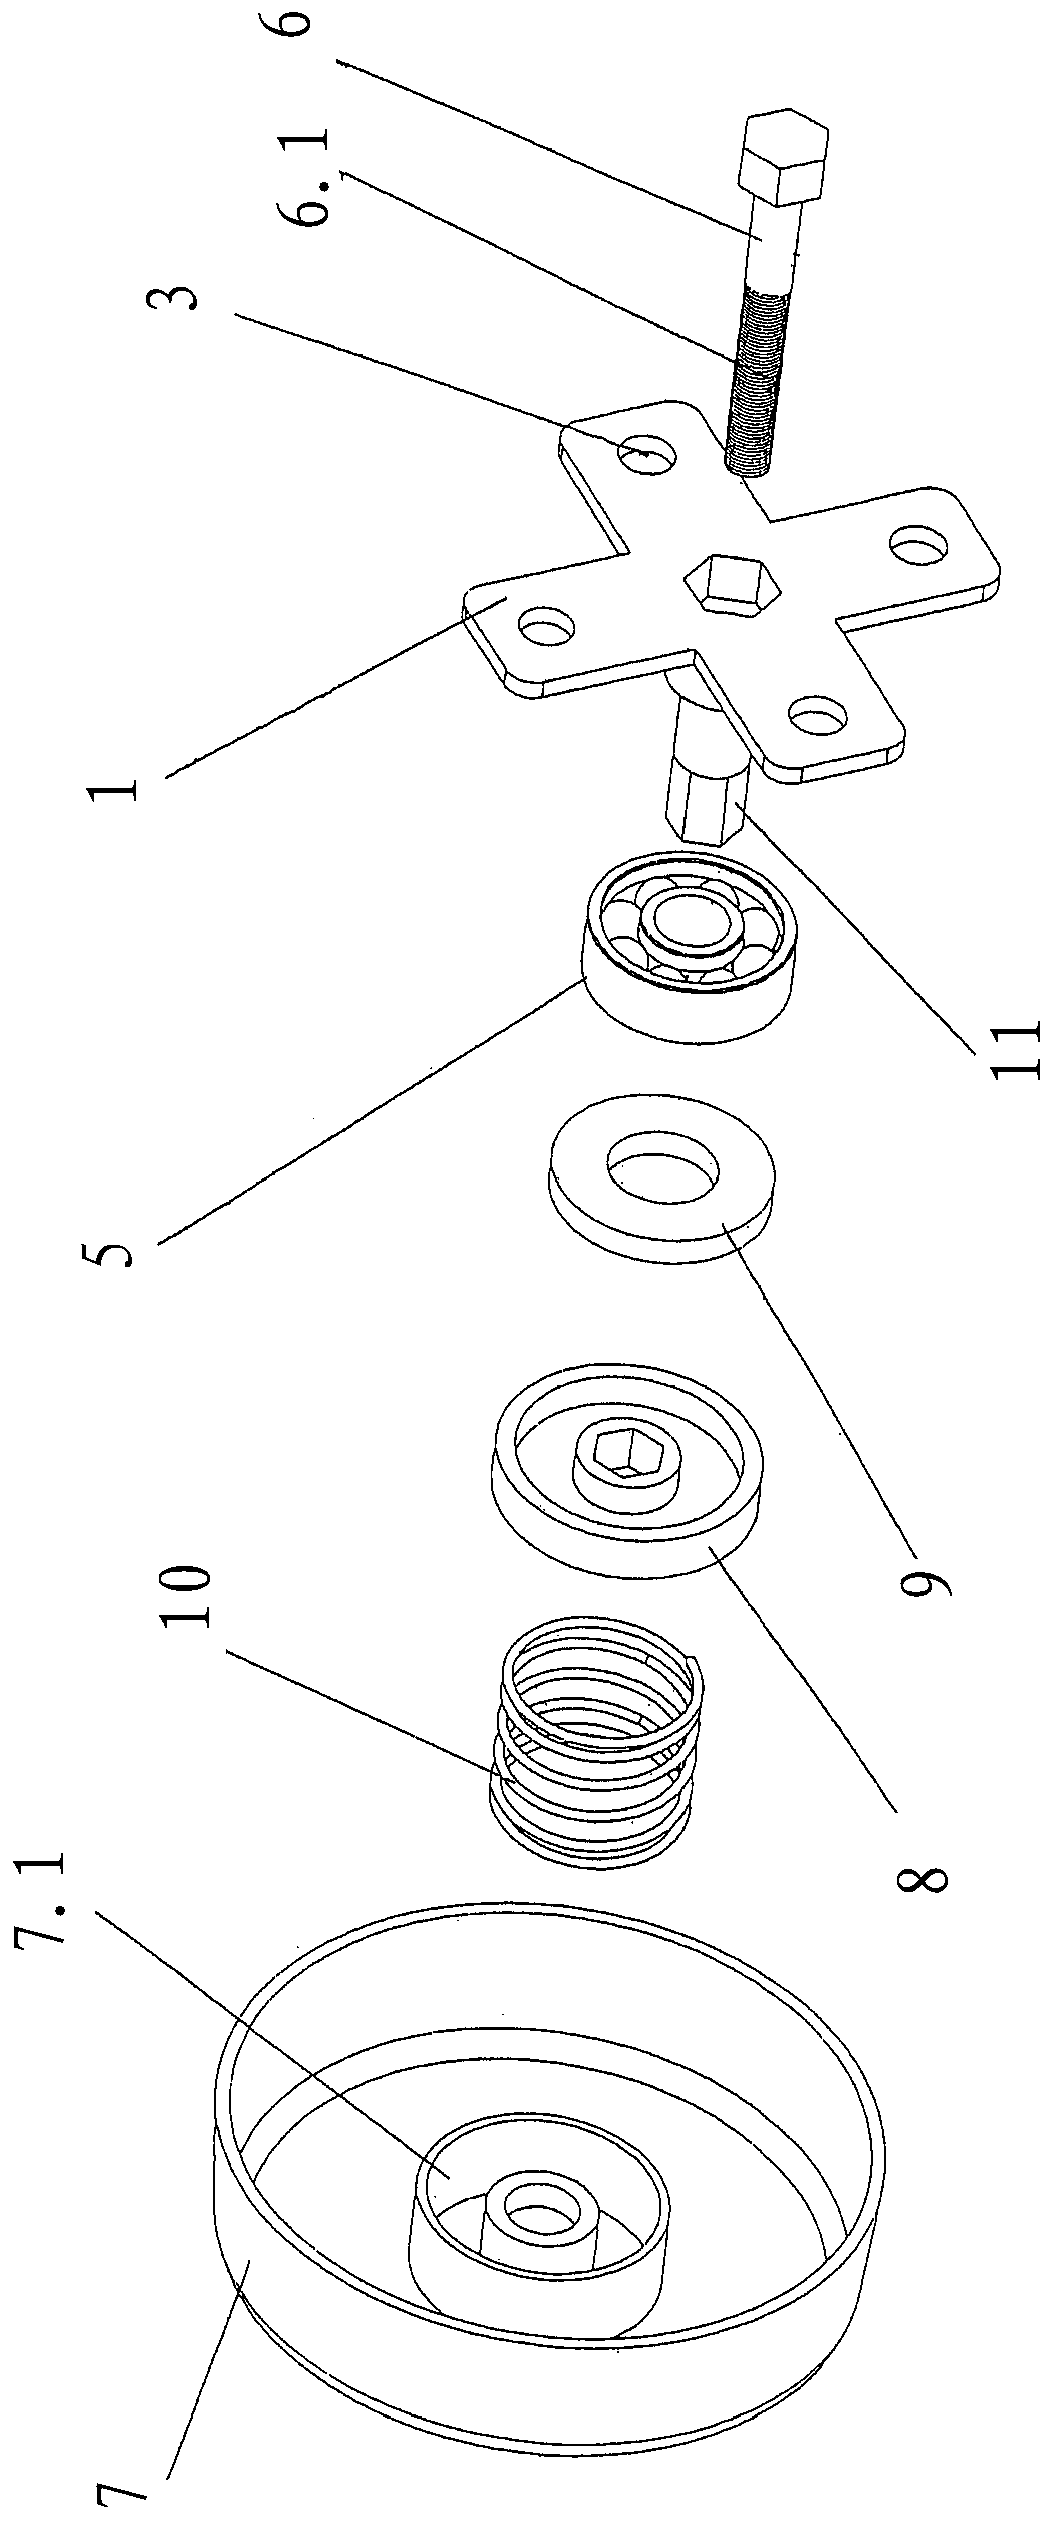 Mounting structure for the dissipating wind surface in box electric fans